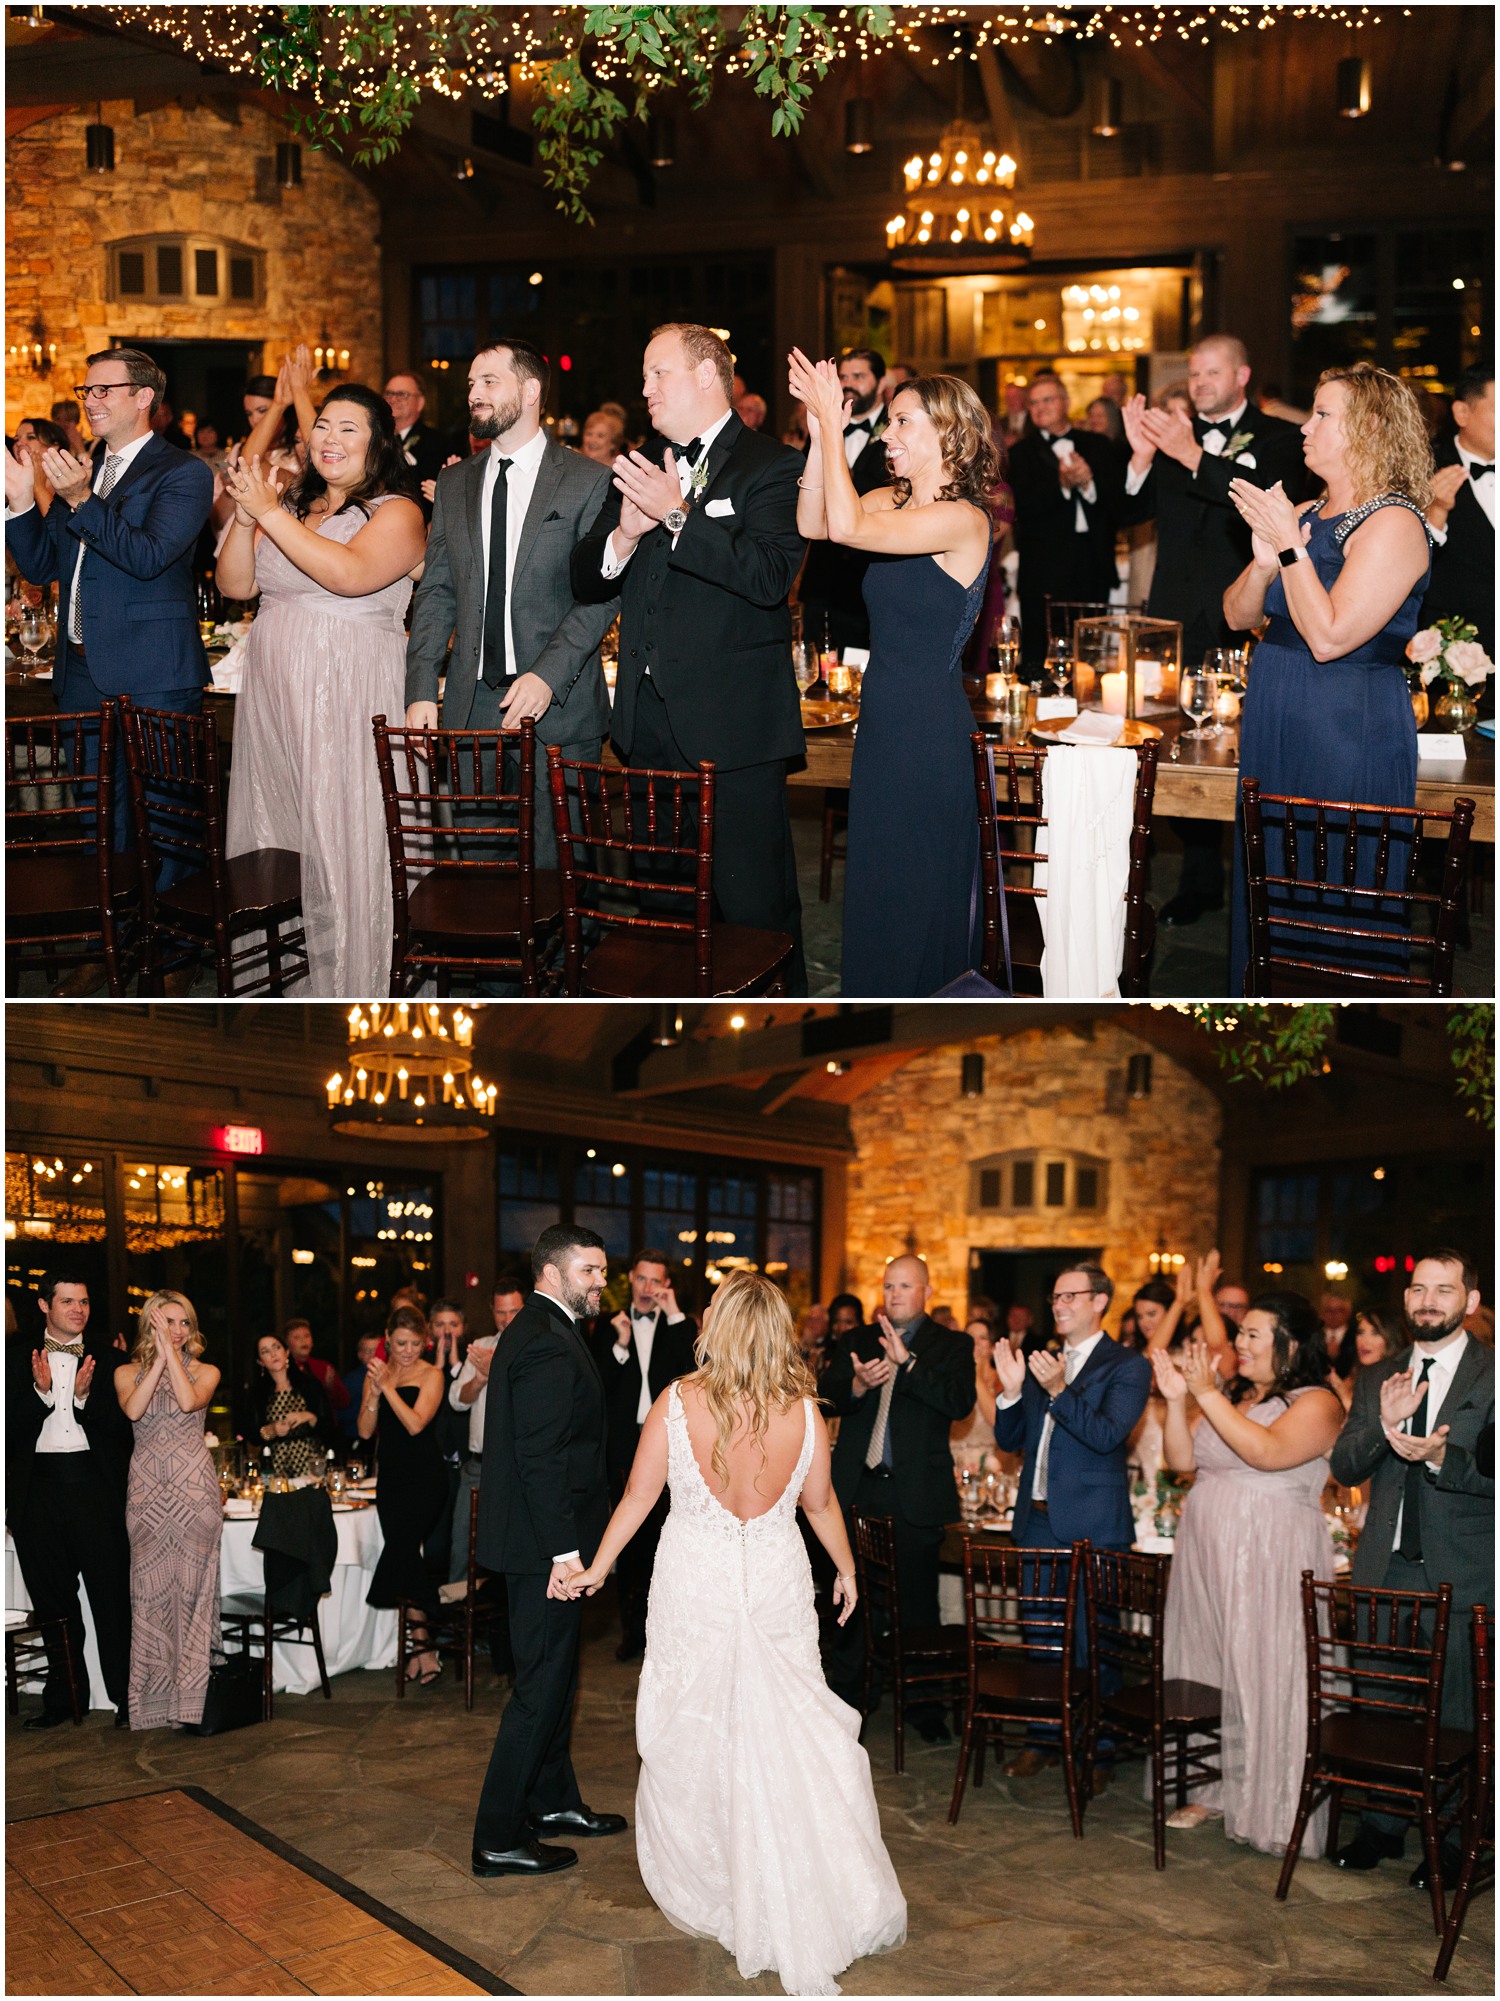 guests welcome bride and groom to wedding reception